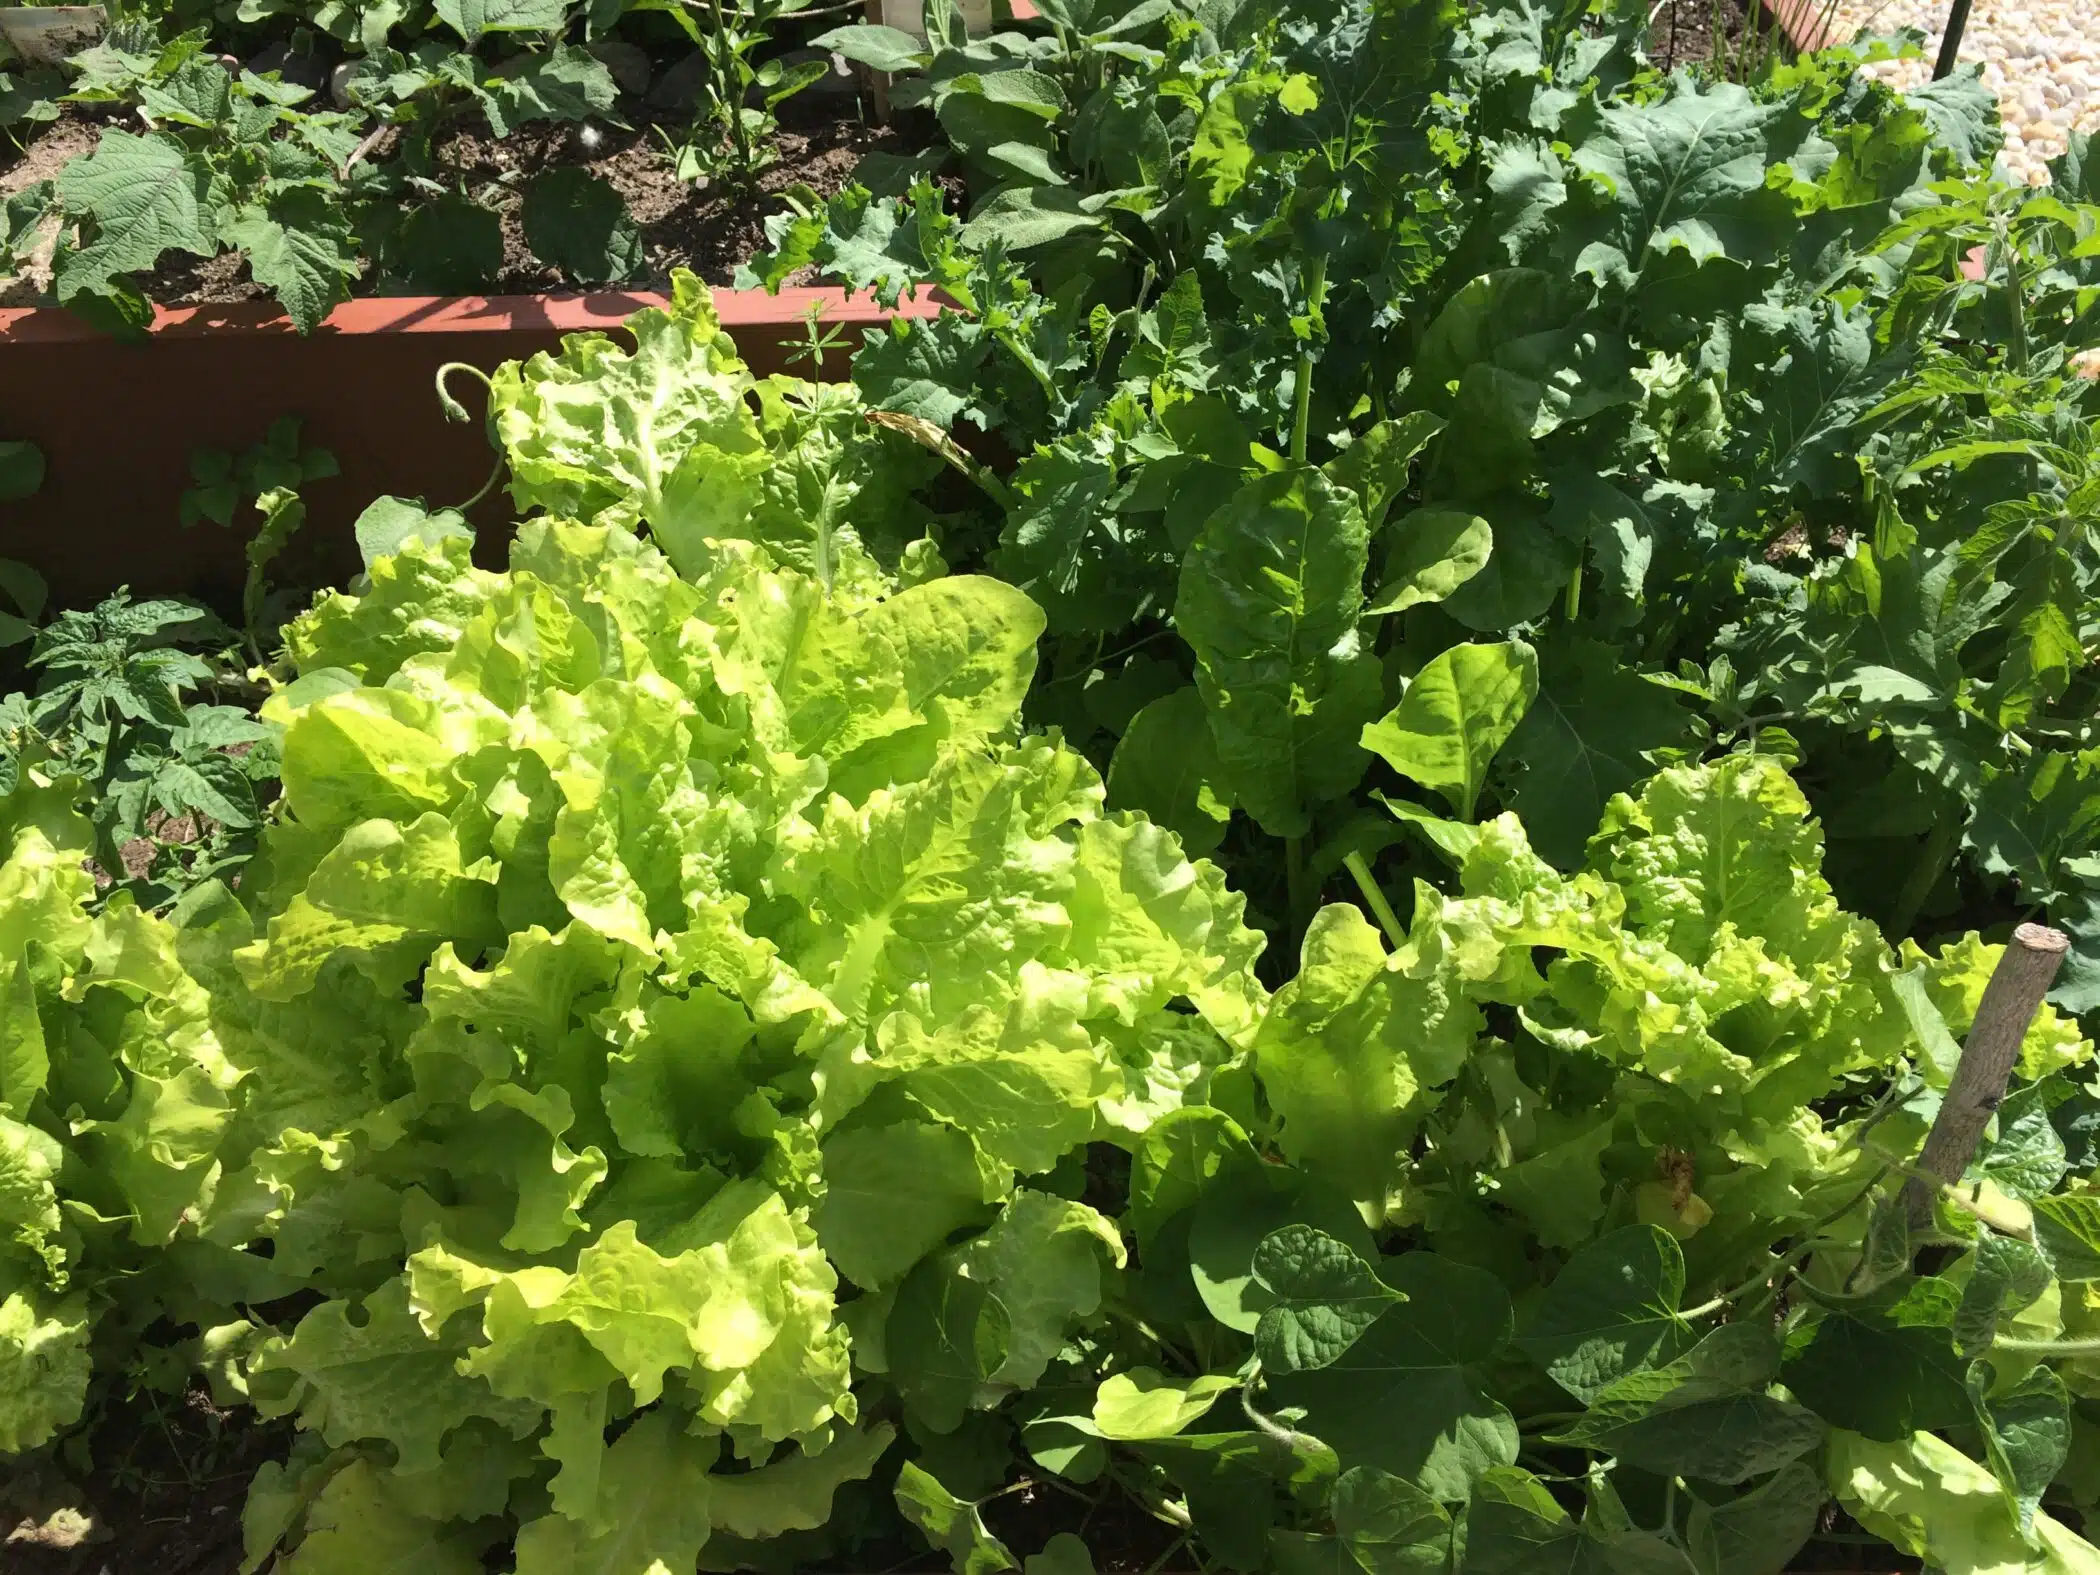 A variety of green lettuces